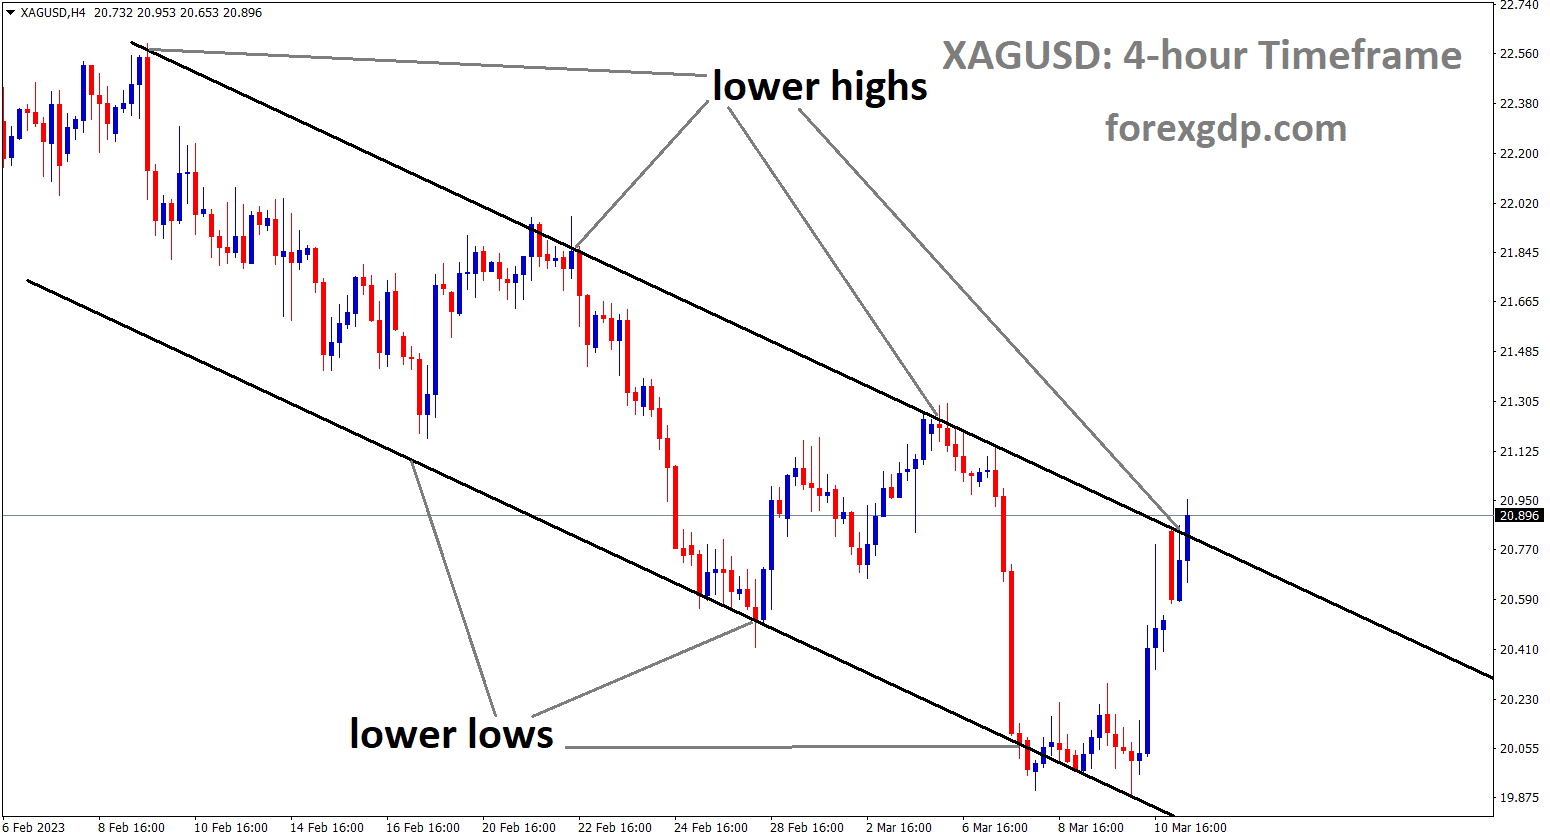 XAGUSD is moving in Descending channel and the market has reached the lower high area of the channel.